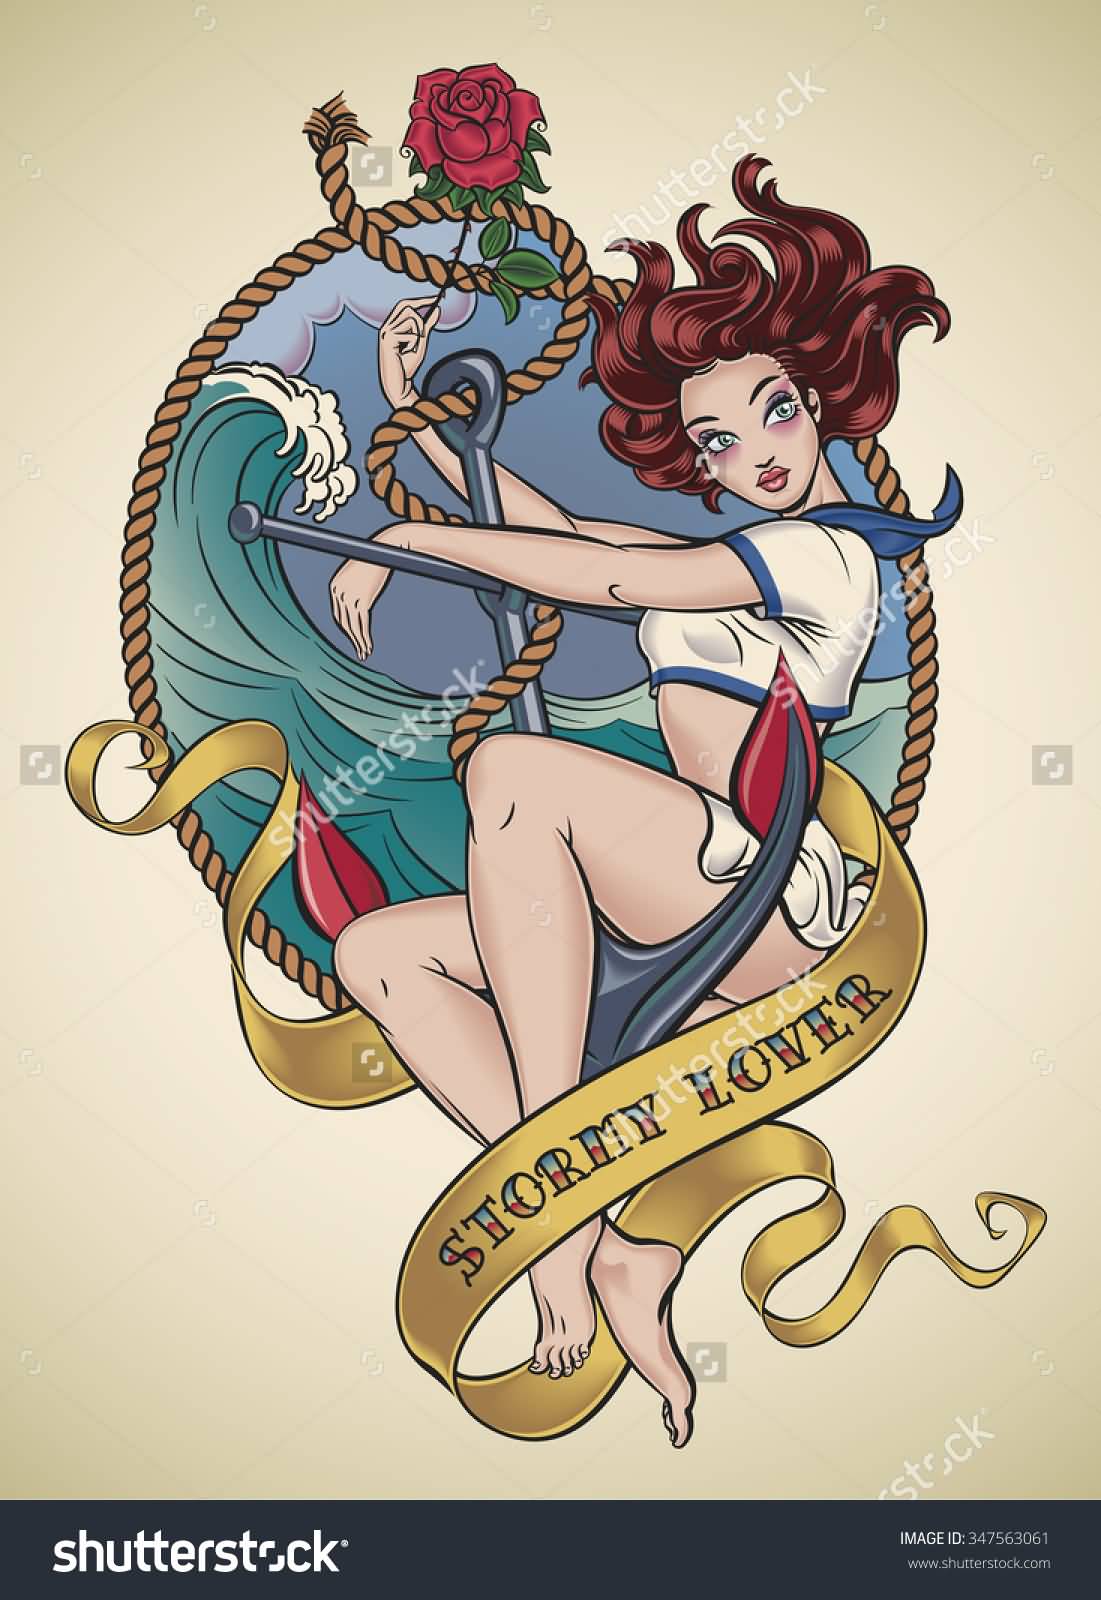 Awesome Sailor Girl With Rope Old School Tattoo Design